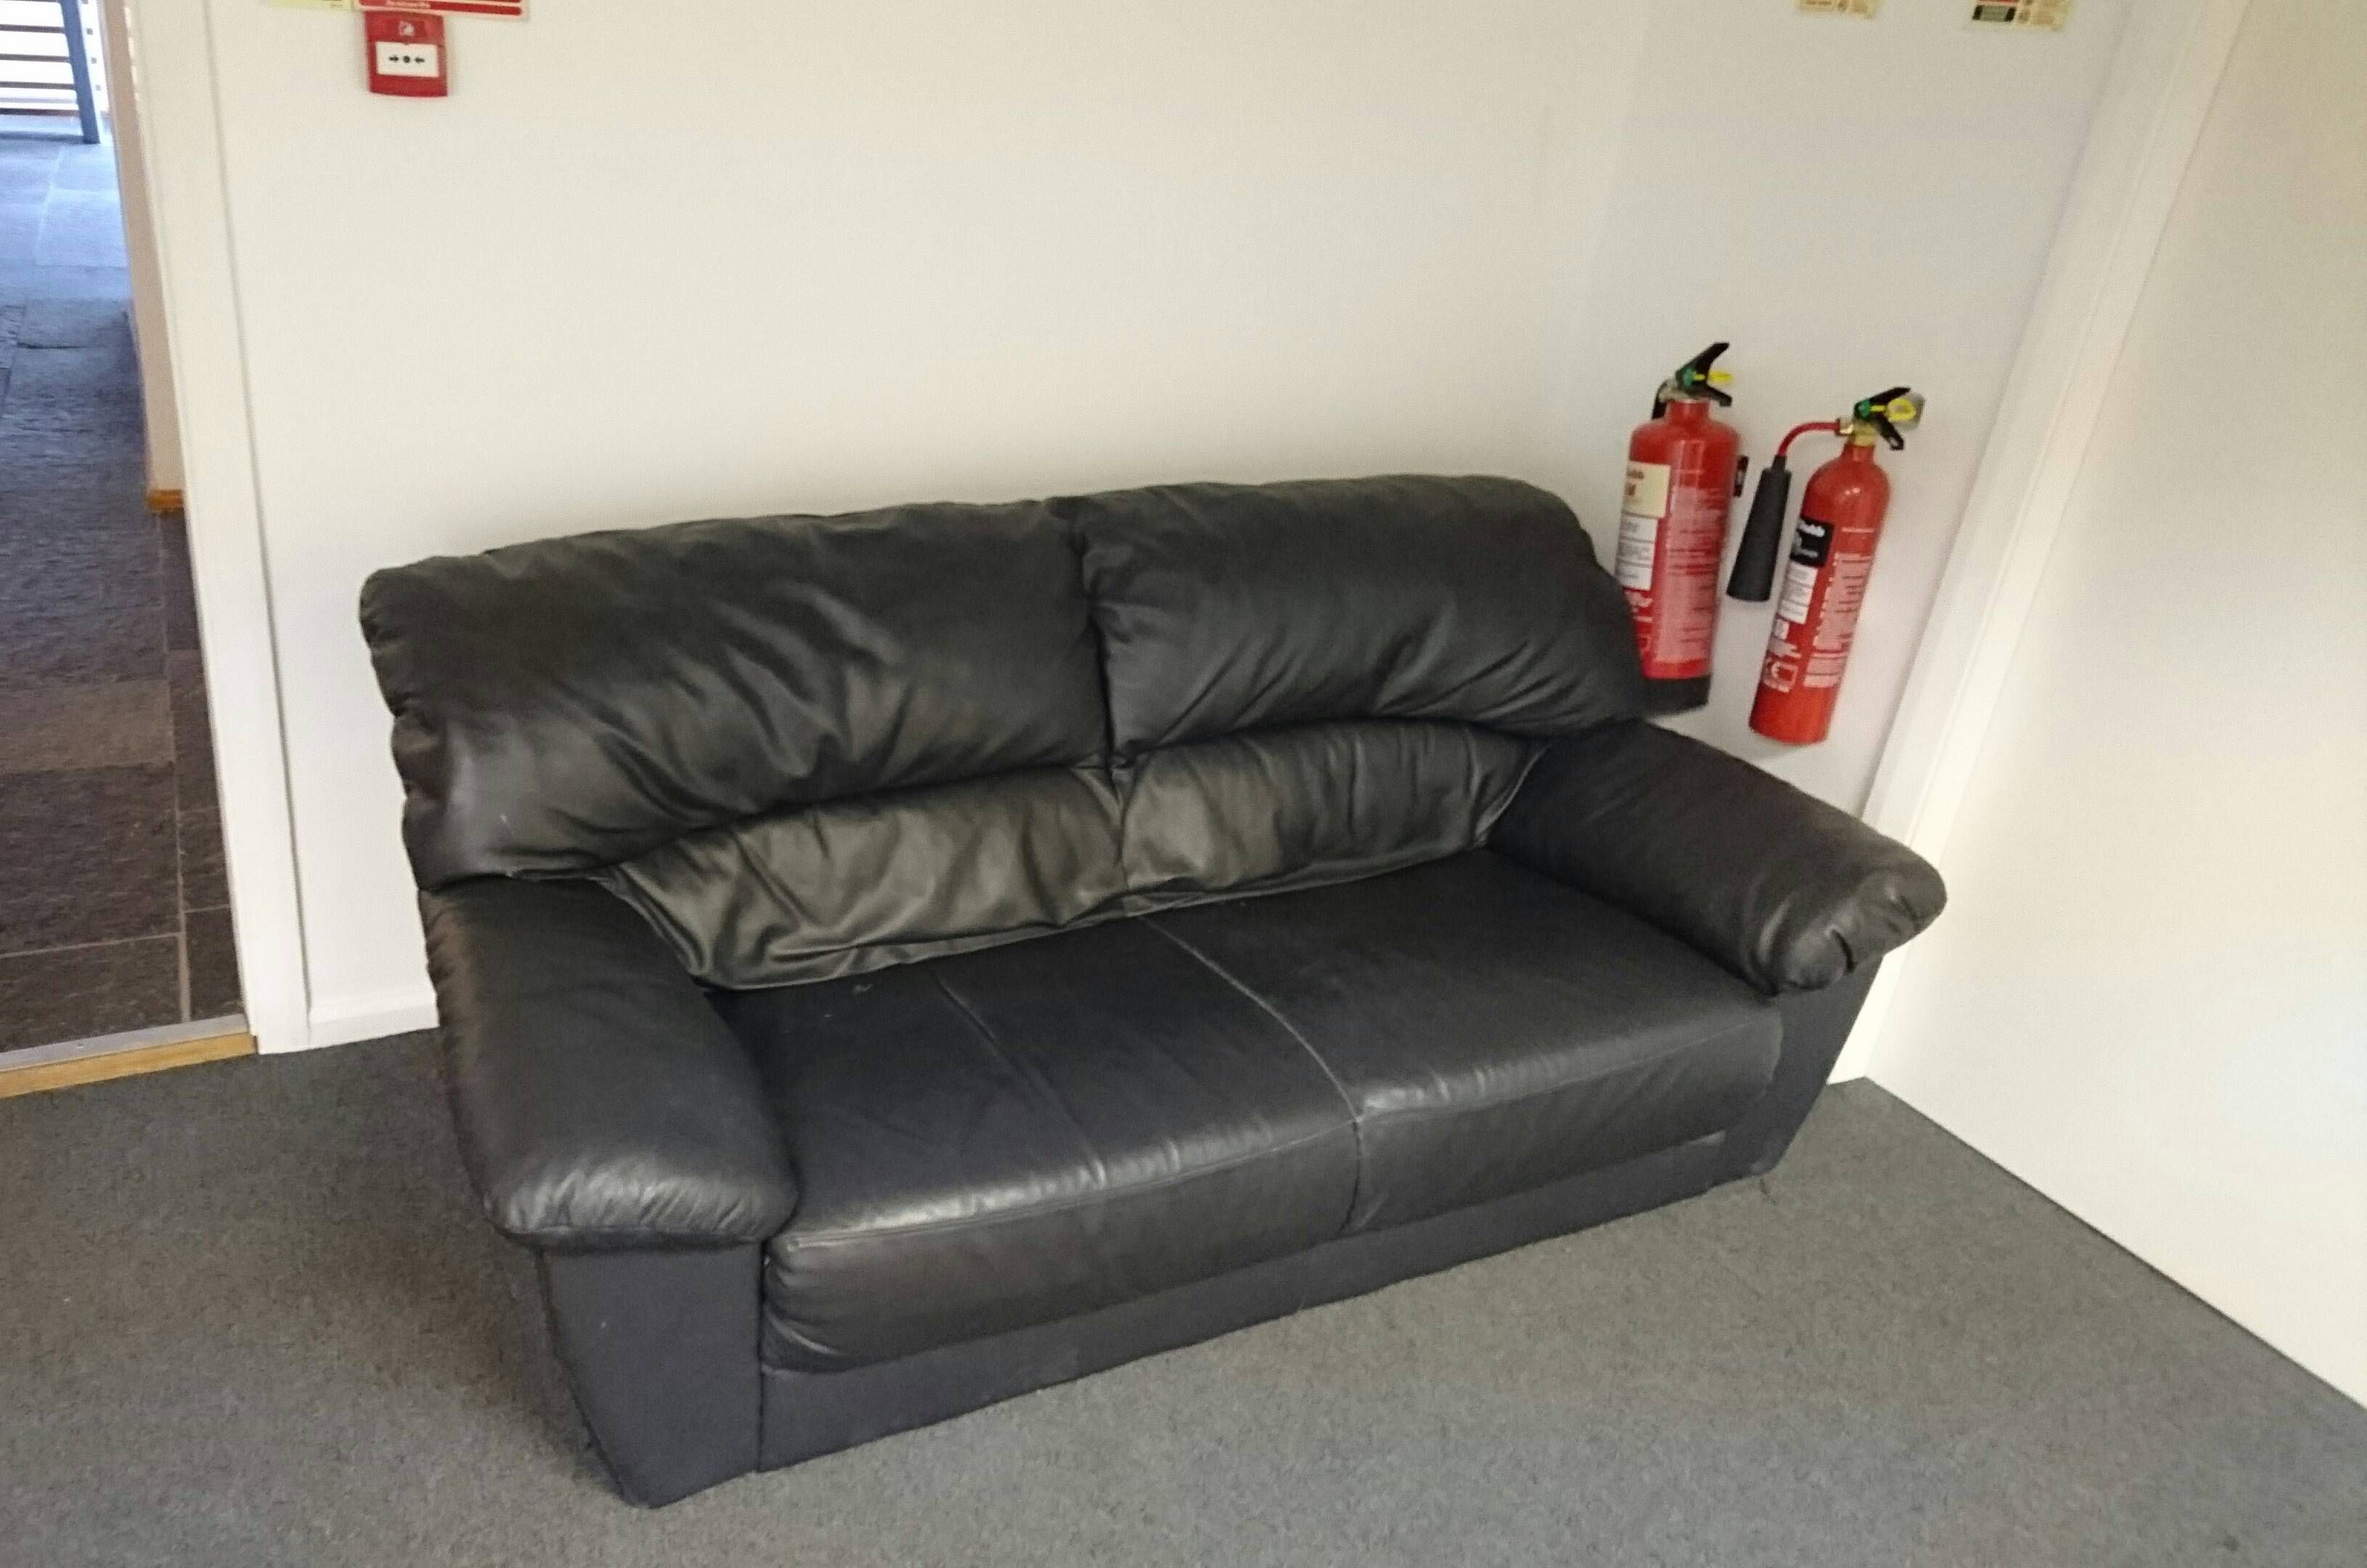 This couch just appeared at work. I think my company might be changing focus.